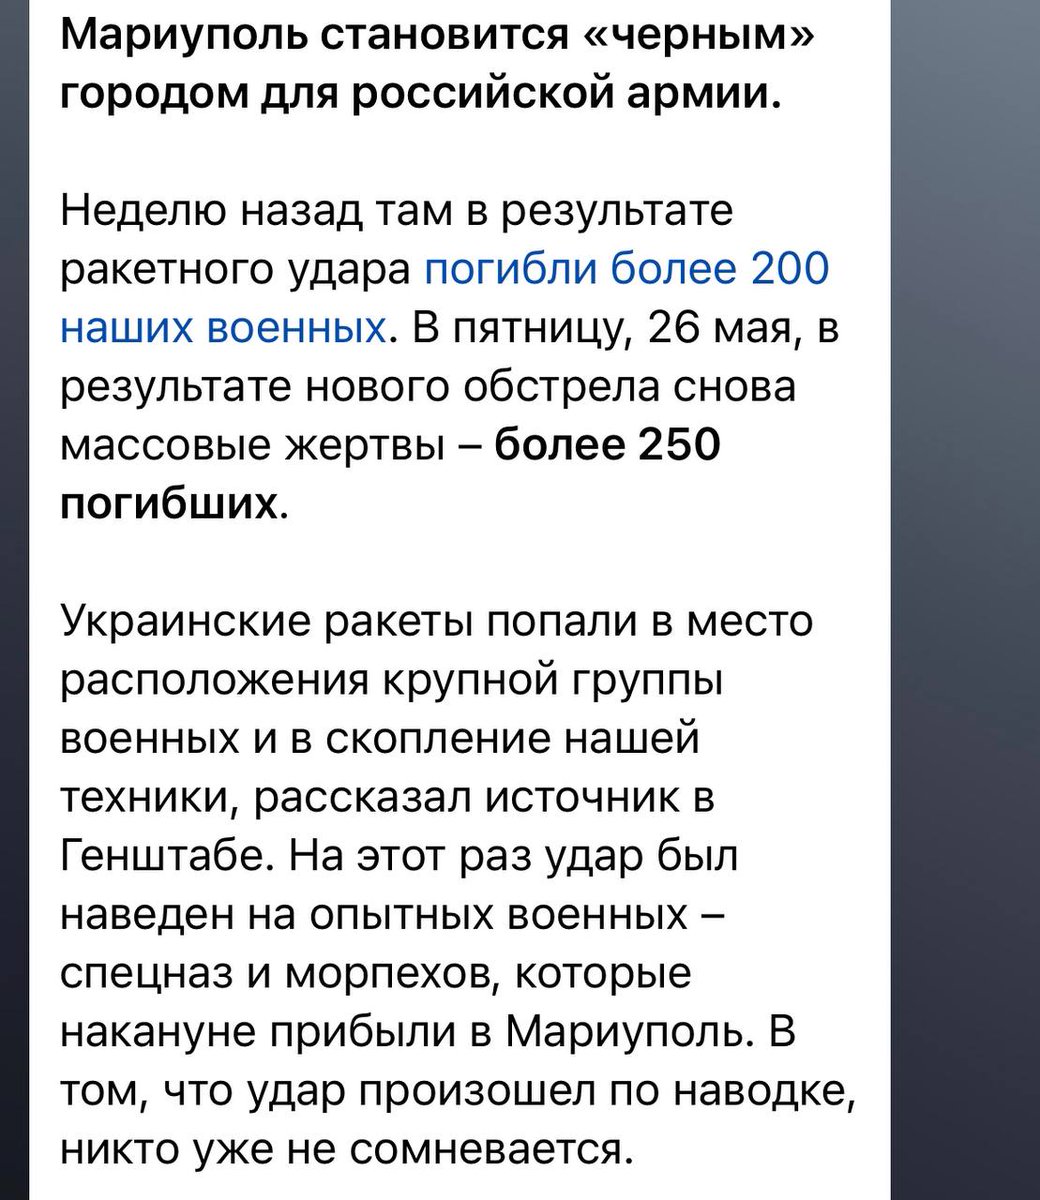 Russian voenkor 👀👀👀
Mariupol and 'Storm Shadow'
450+ dead orks + military equipment